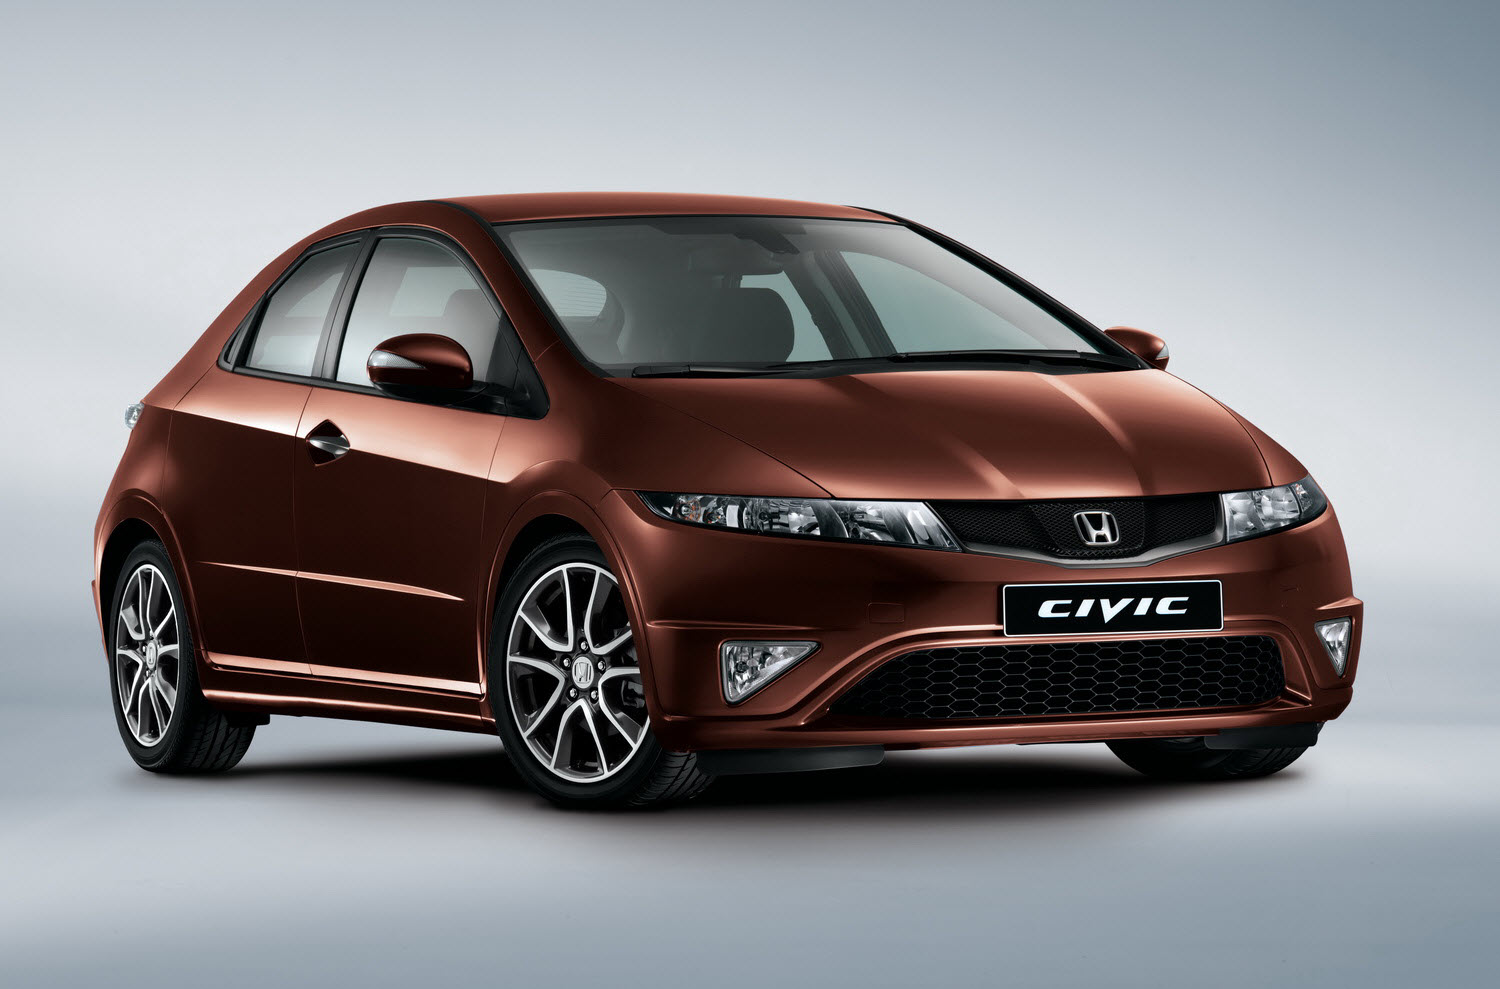 Honda Civic updated for the UK